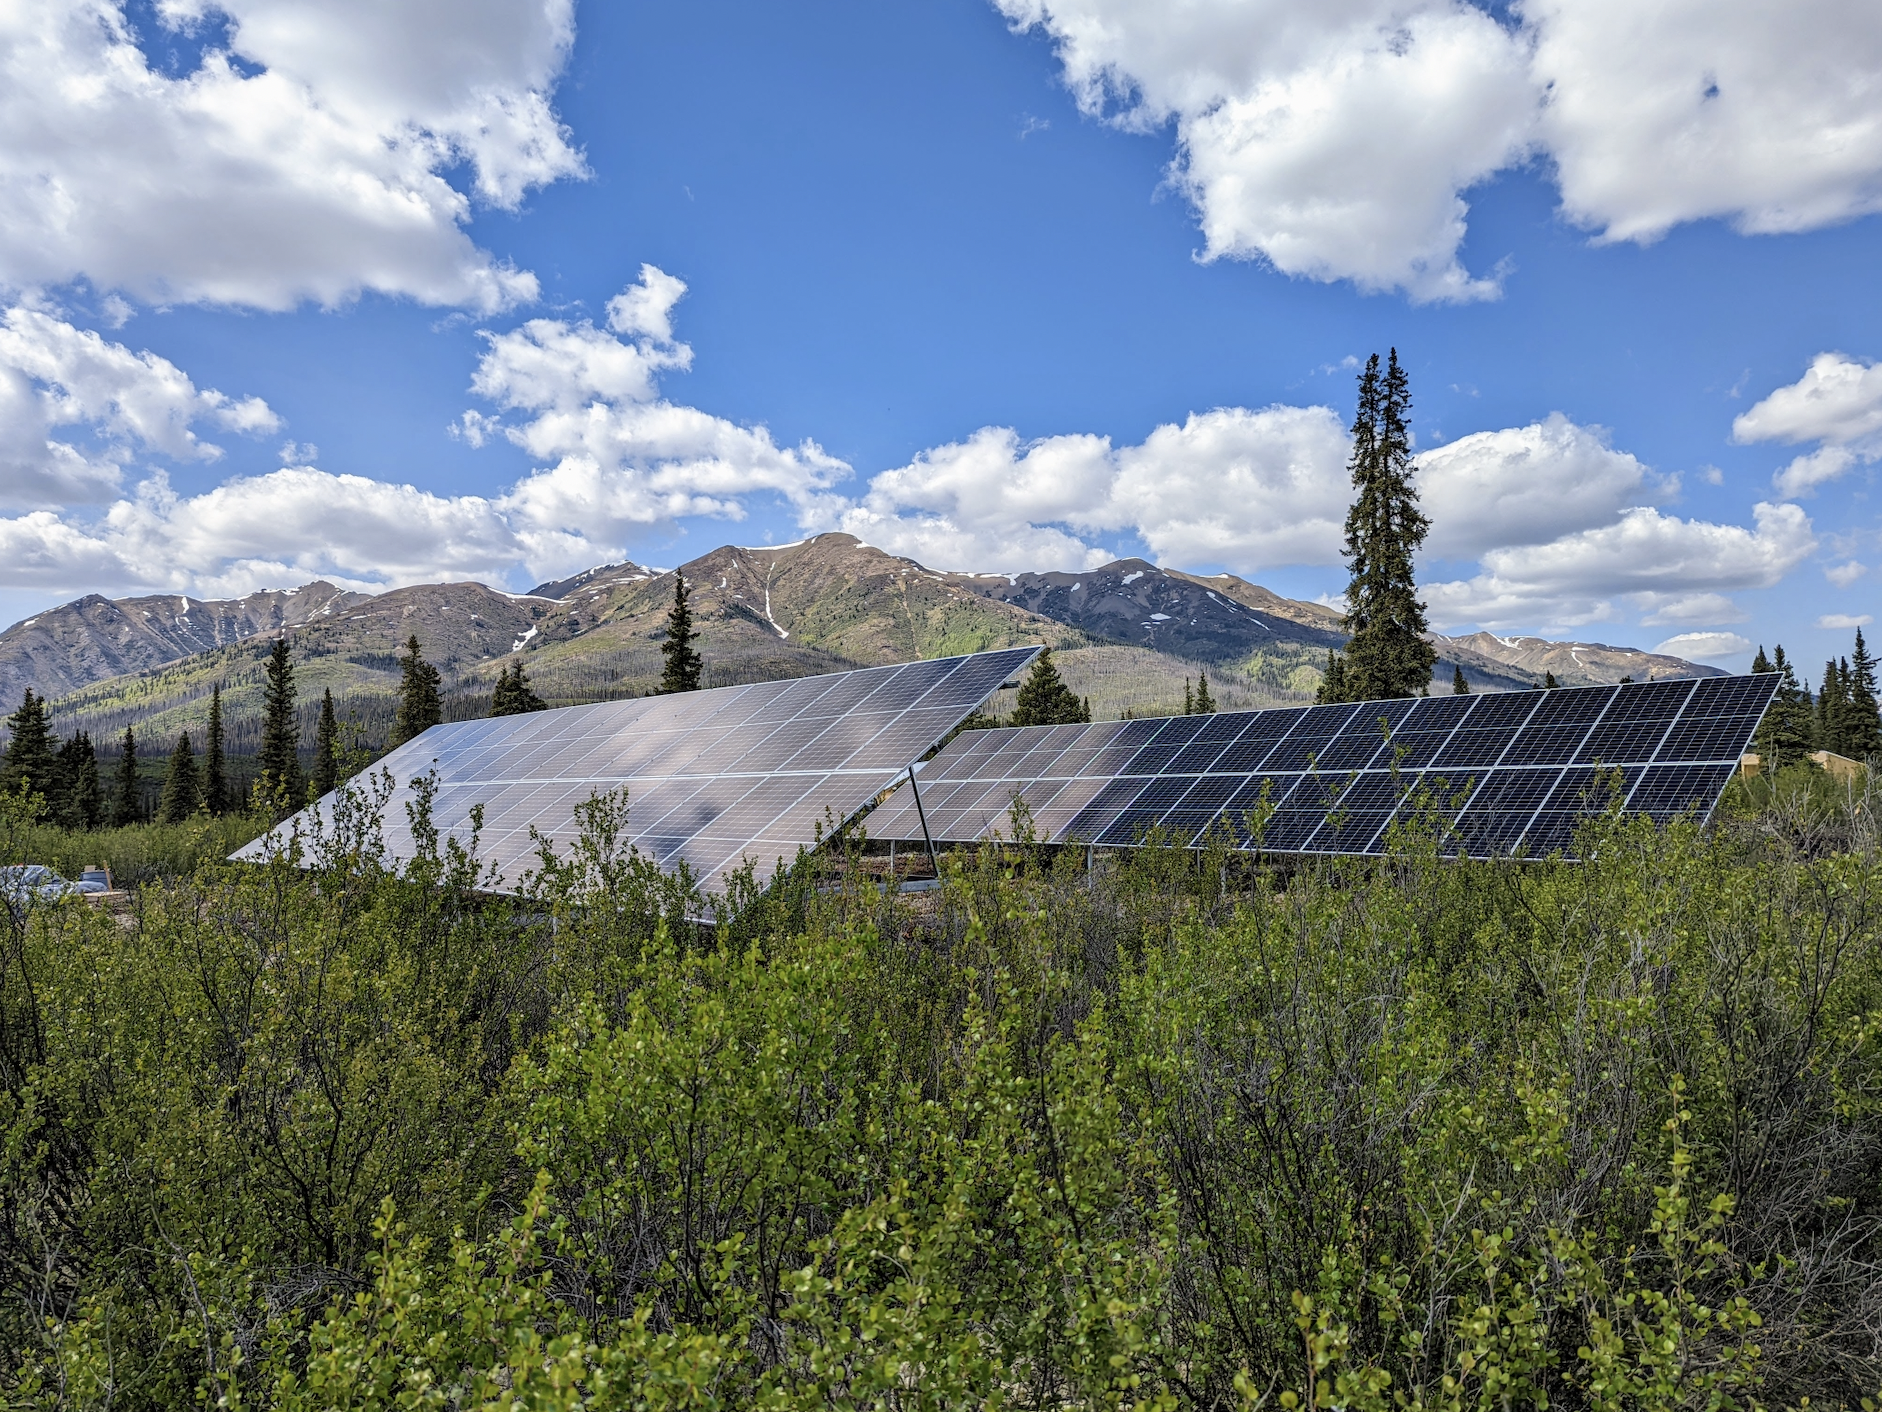 SNOWLINE GOLD ANNOUNCES AGREEMENT WITH NACHO NYAK DUN DEVELOPMENT CORPORATION TO POWER MAIN CAMP WITH LARGE-SCALE SOLAR GENERATOR